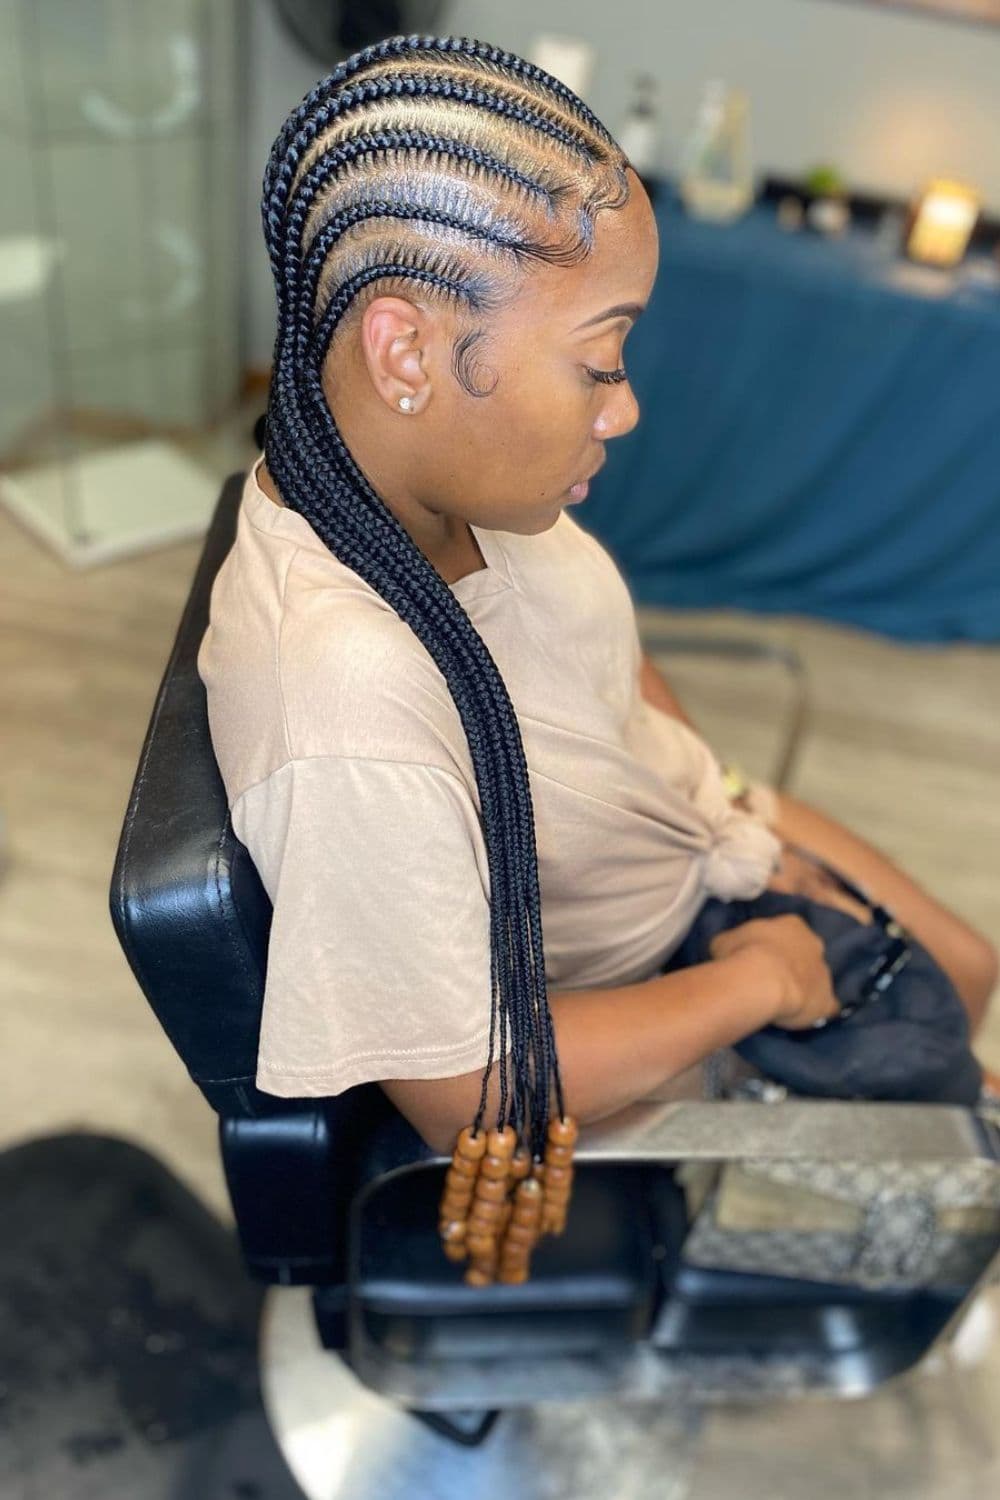 A woman sitting in a salon with stitch cornrows with beads.